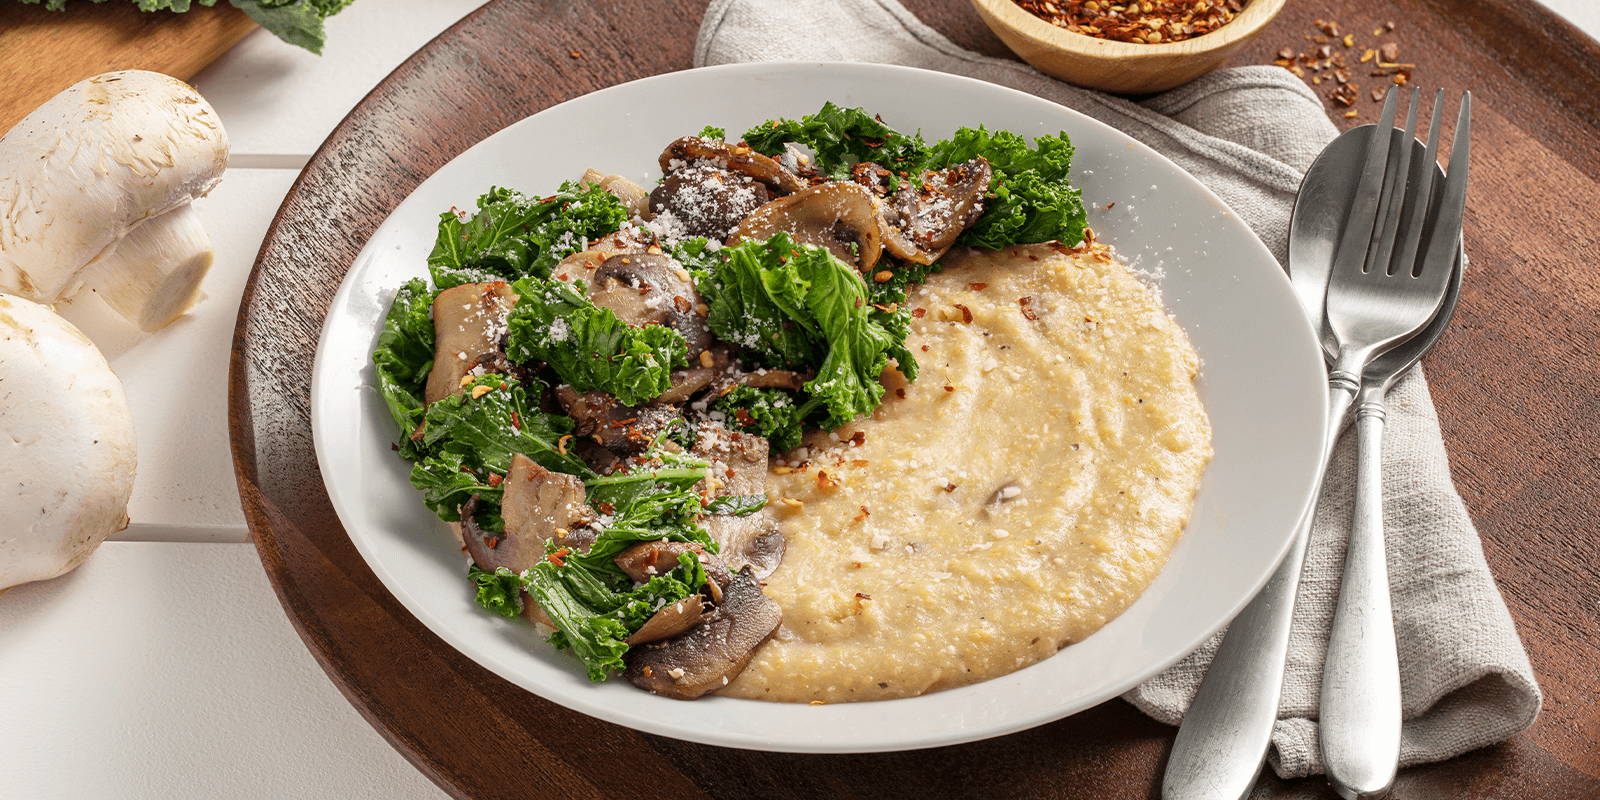 The prepared ZENB Creamy Mushroom Polenta with Kale & Garlic in a shallow white dish atop a wooden cutting board with silverware on a gray napkin on the side. 